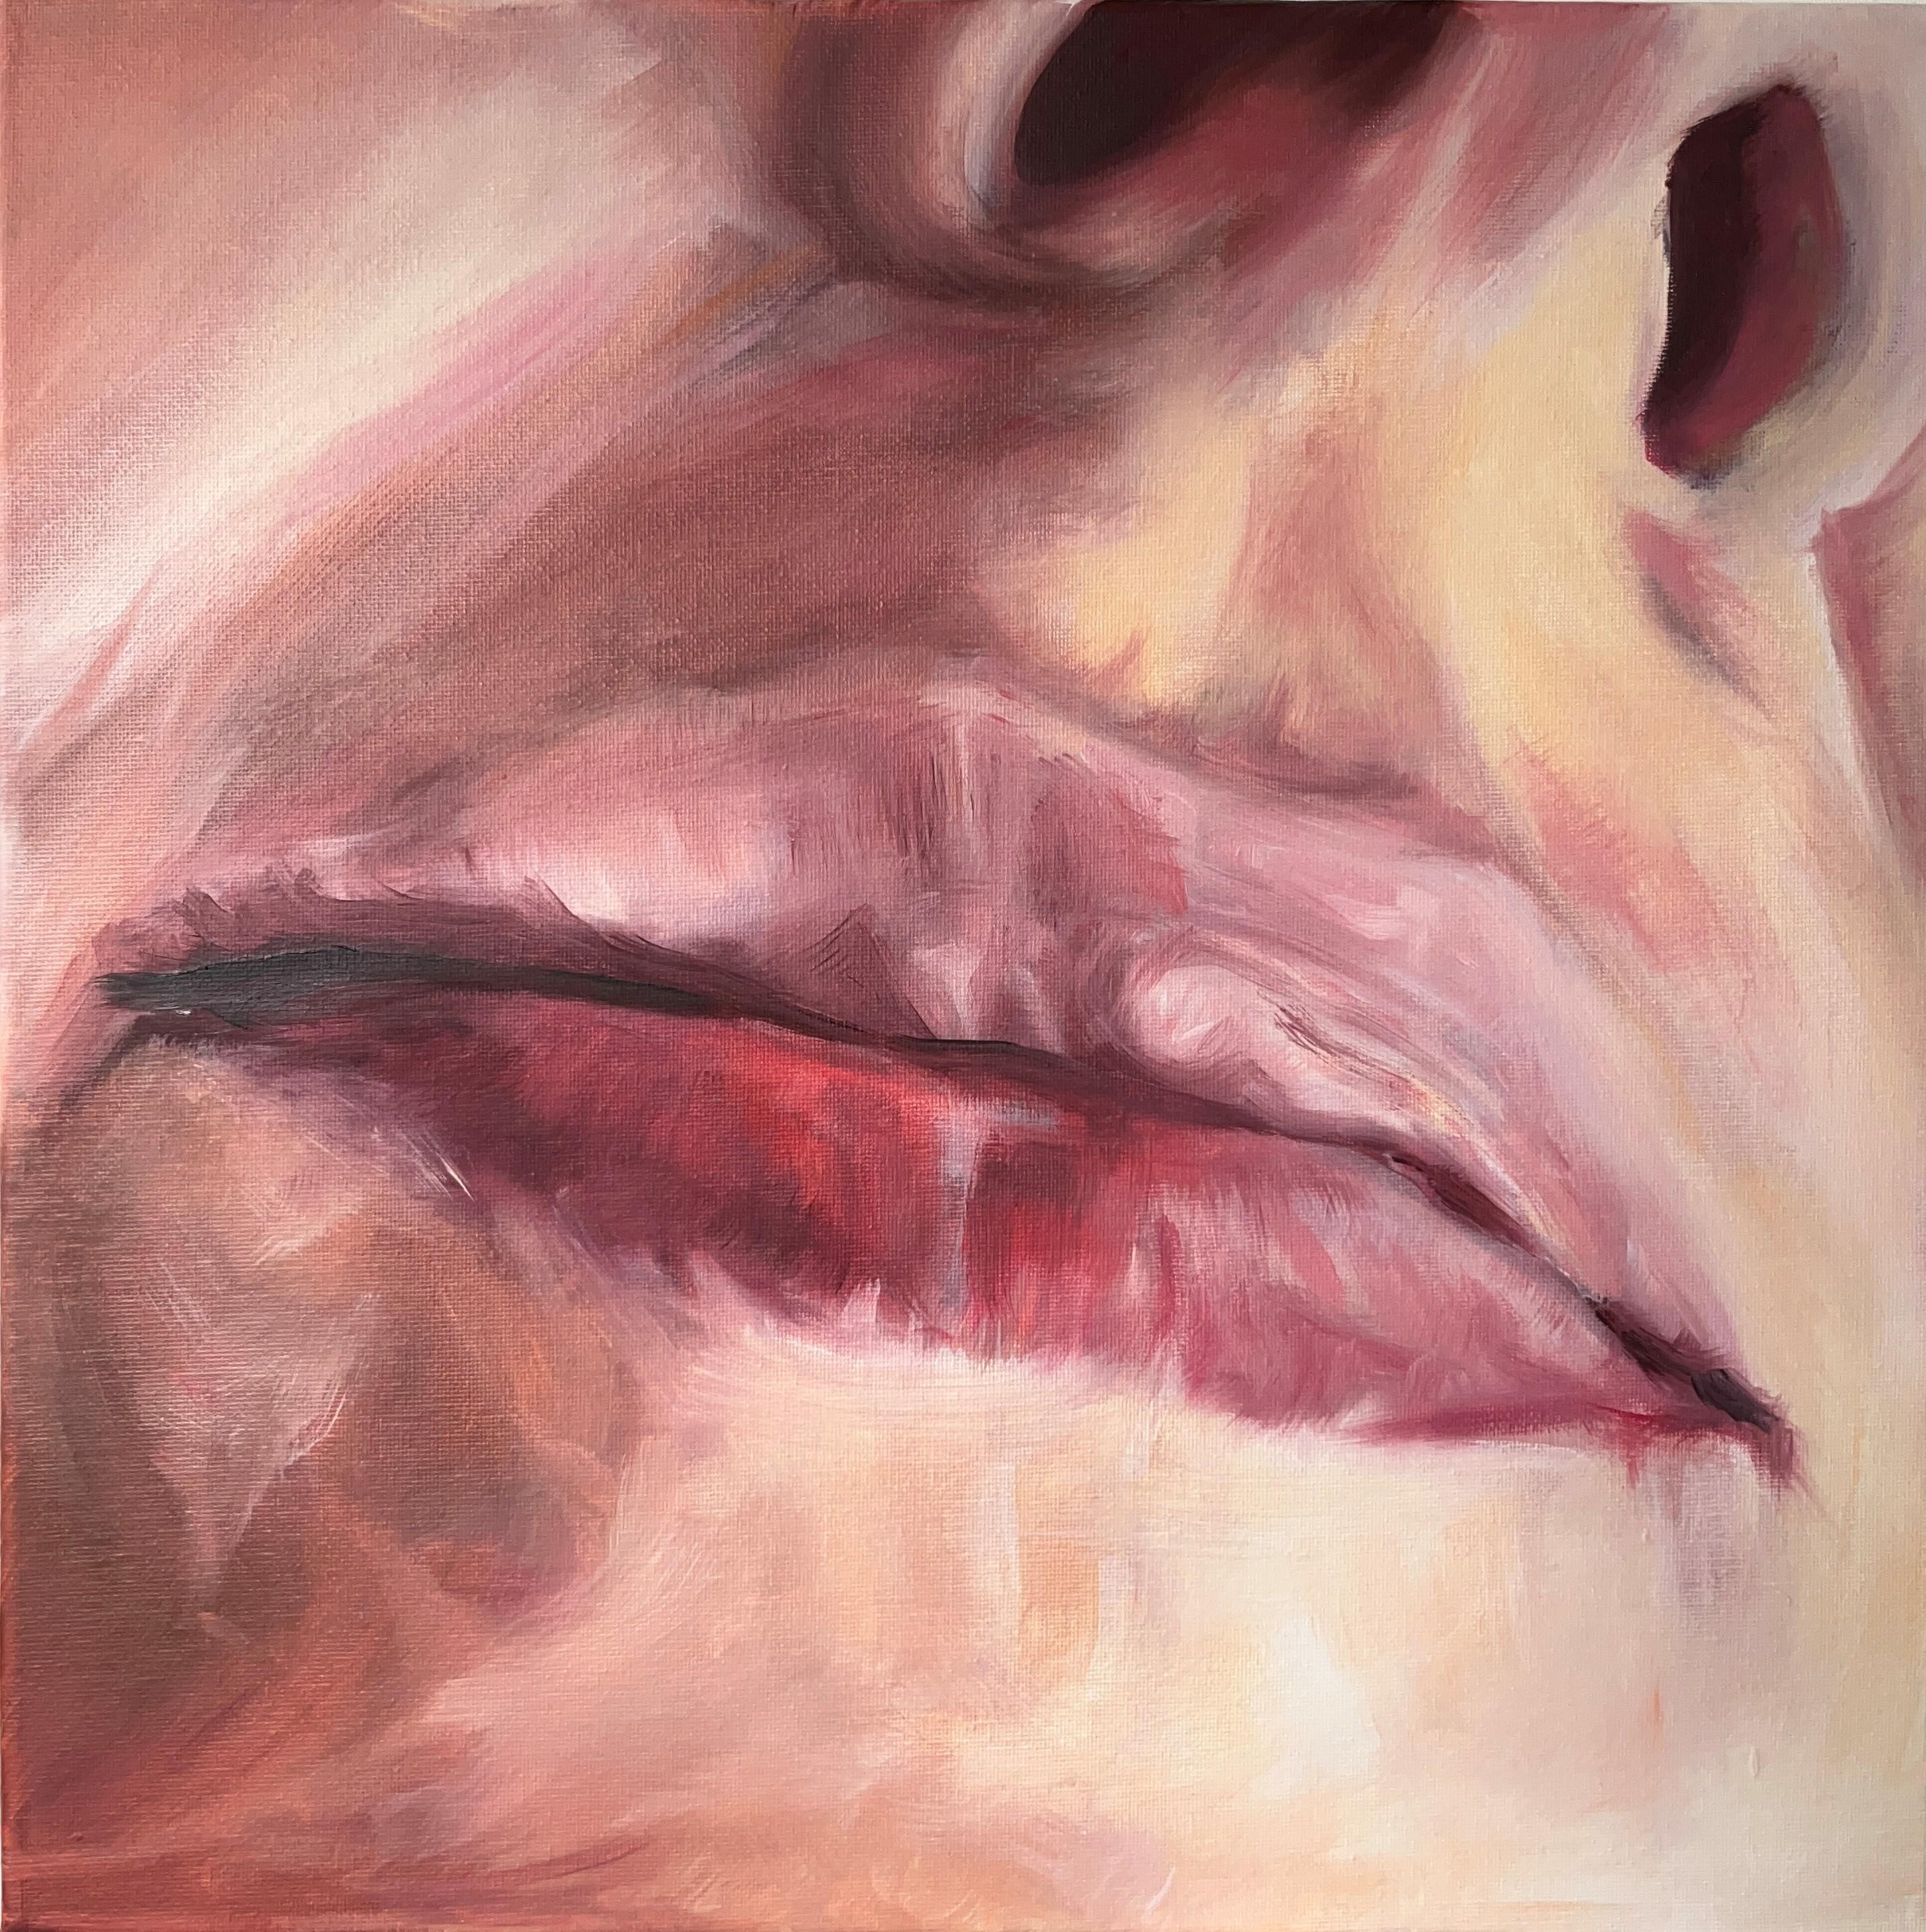 LIPS by Anna Jung - Painting by Unknown